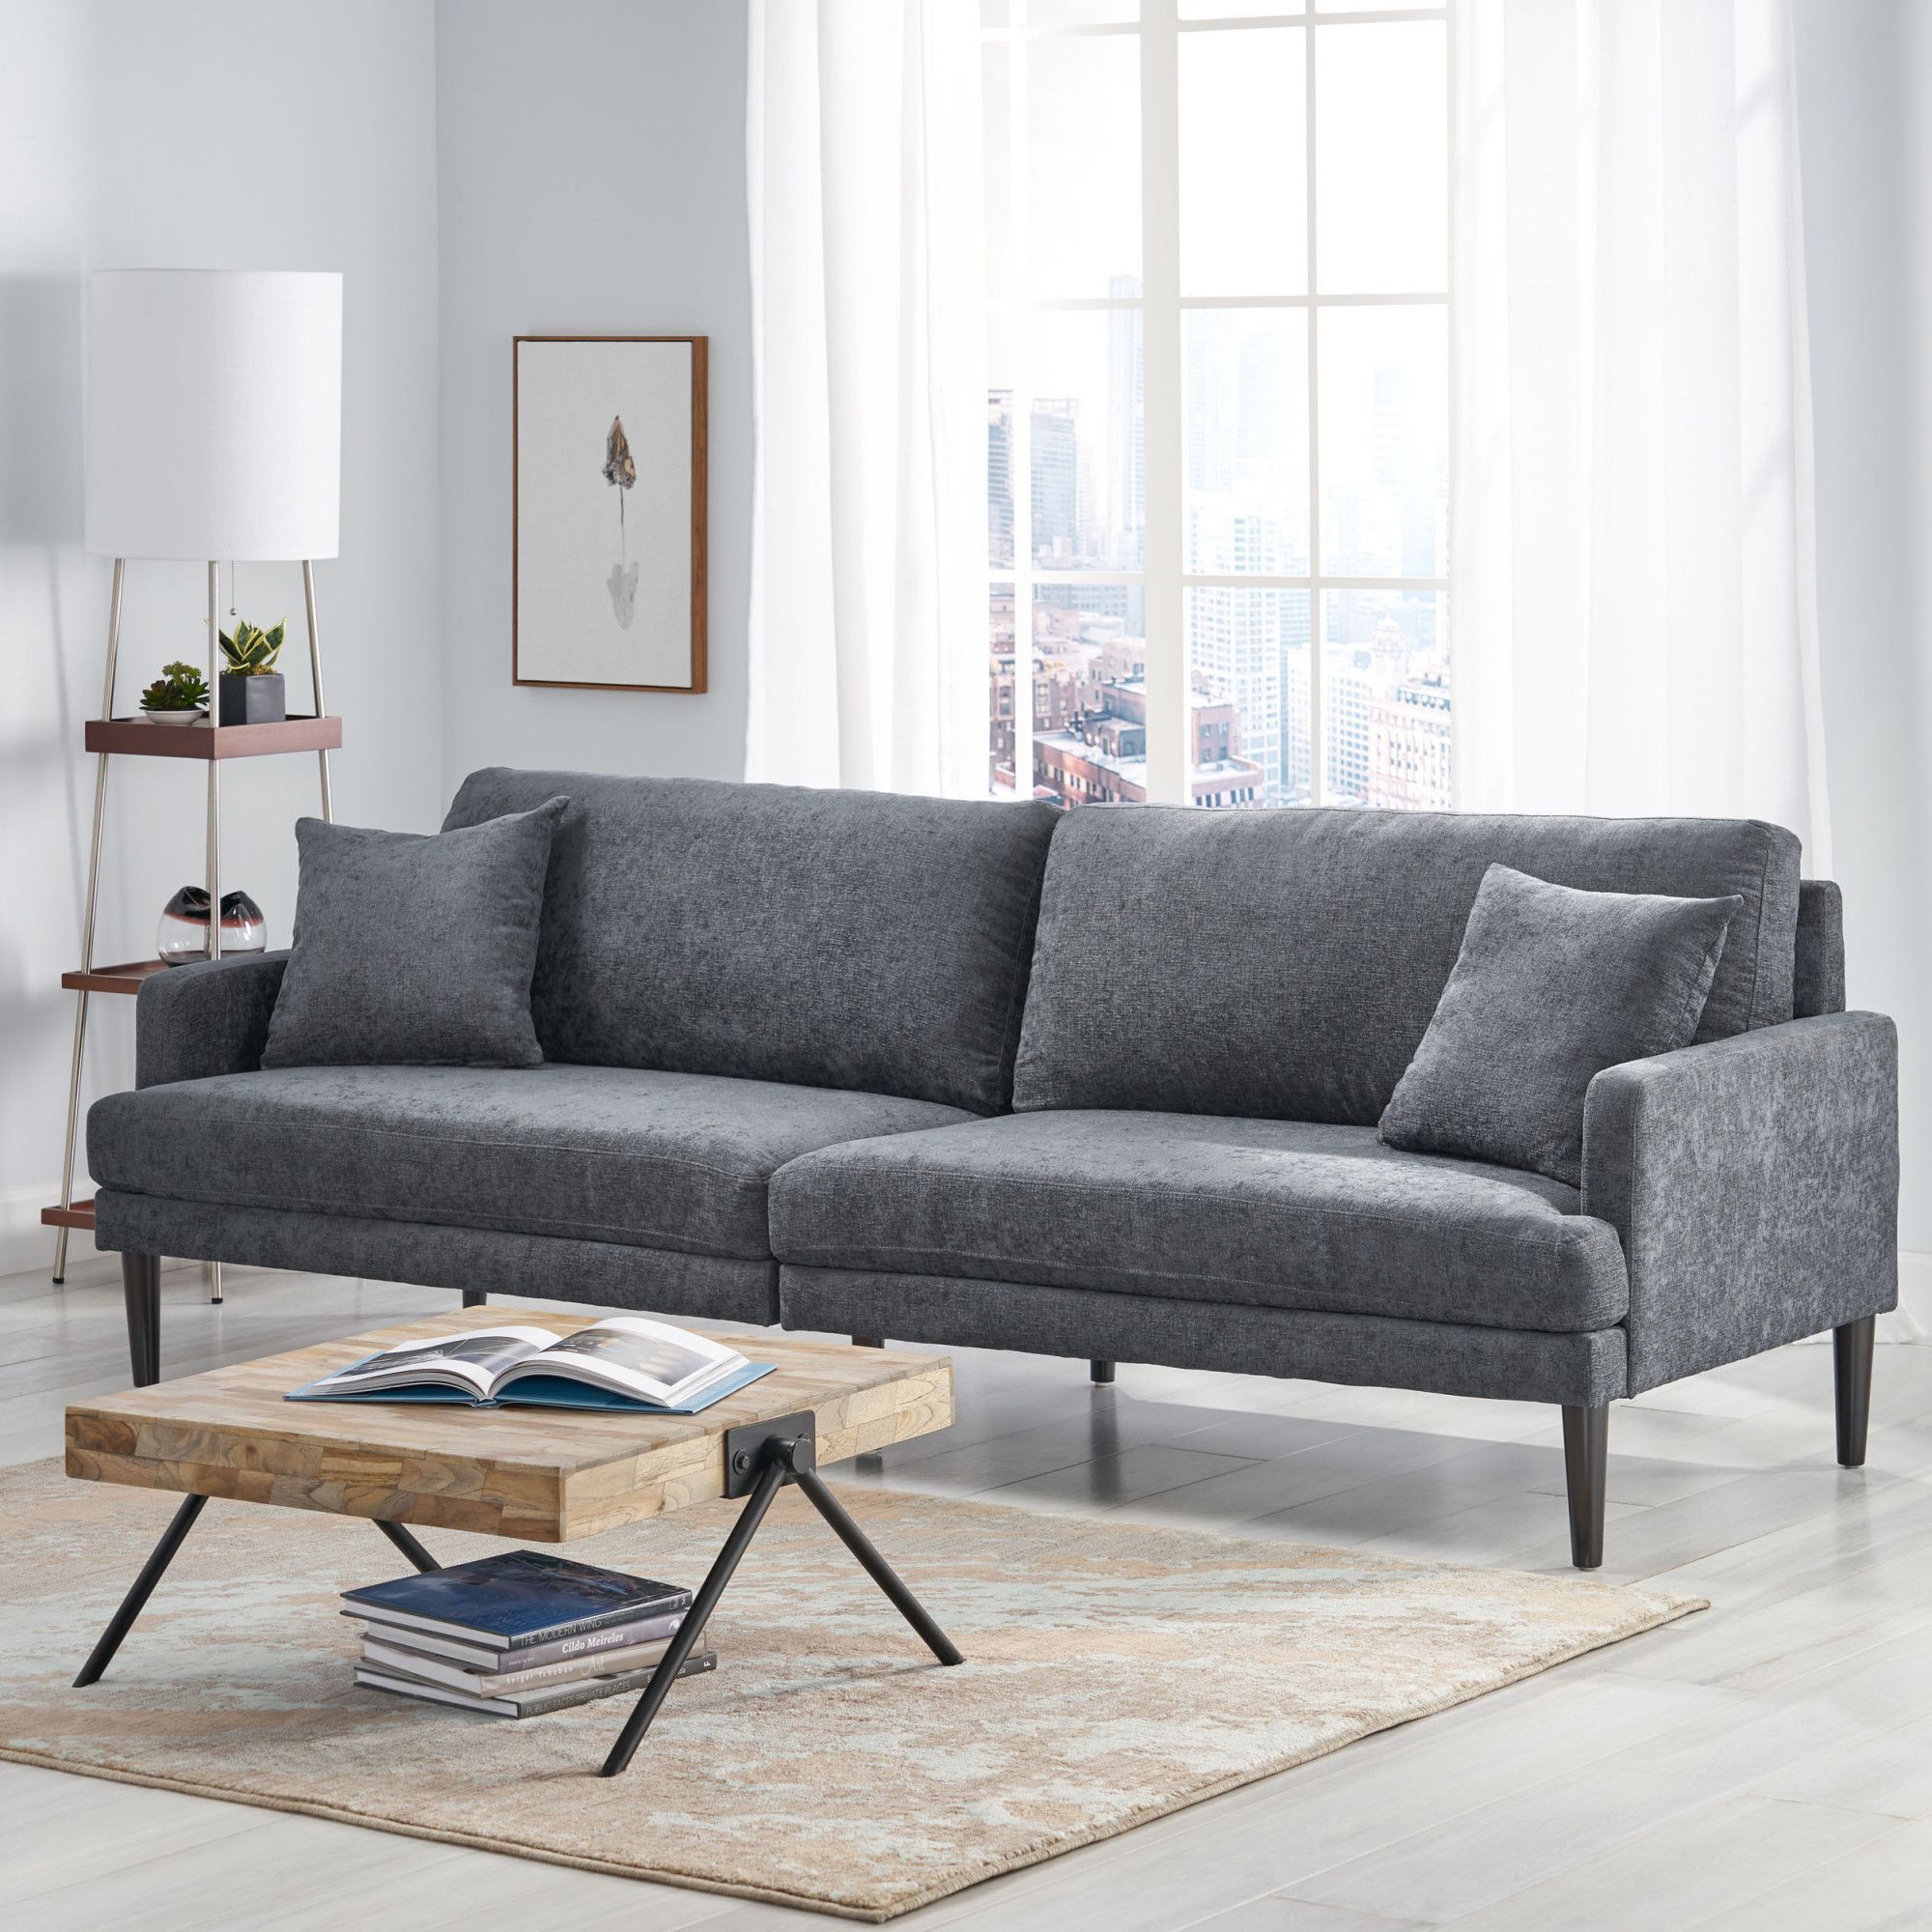 Malverne Contemporary 3 Seater Fabric Sofa With Accent Pillows, Charcoal  And Dark Brown In Charcoal/dark Brownnoble House Intended For Modern 3 Seater Sofas (View 8 of 15)